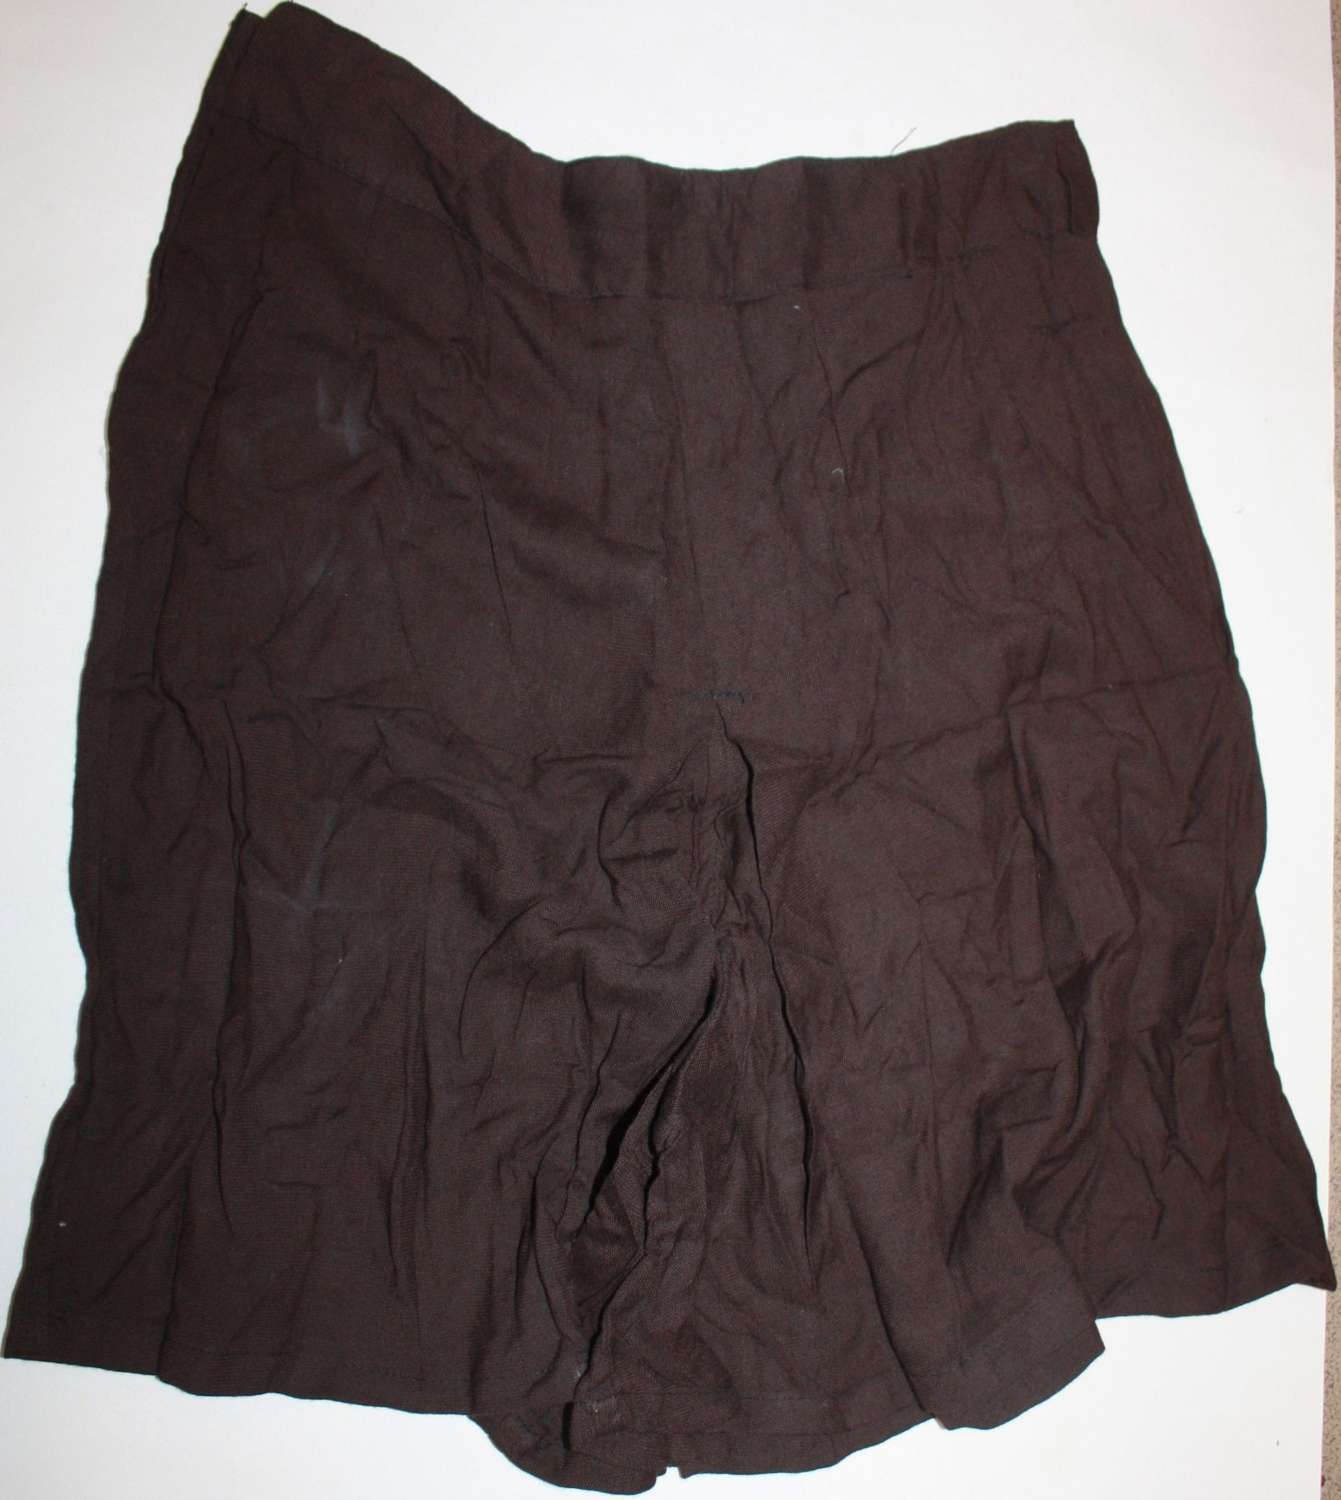 A PAIR OF ATS PT SHORTS SIZE 4 EXAMPLE WAIST 30-31